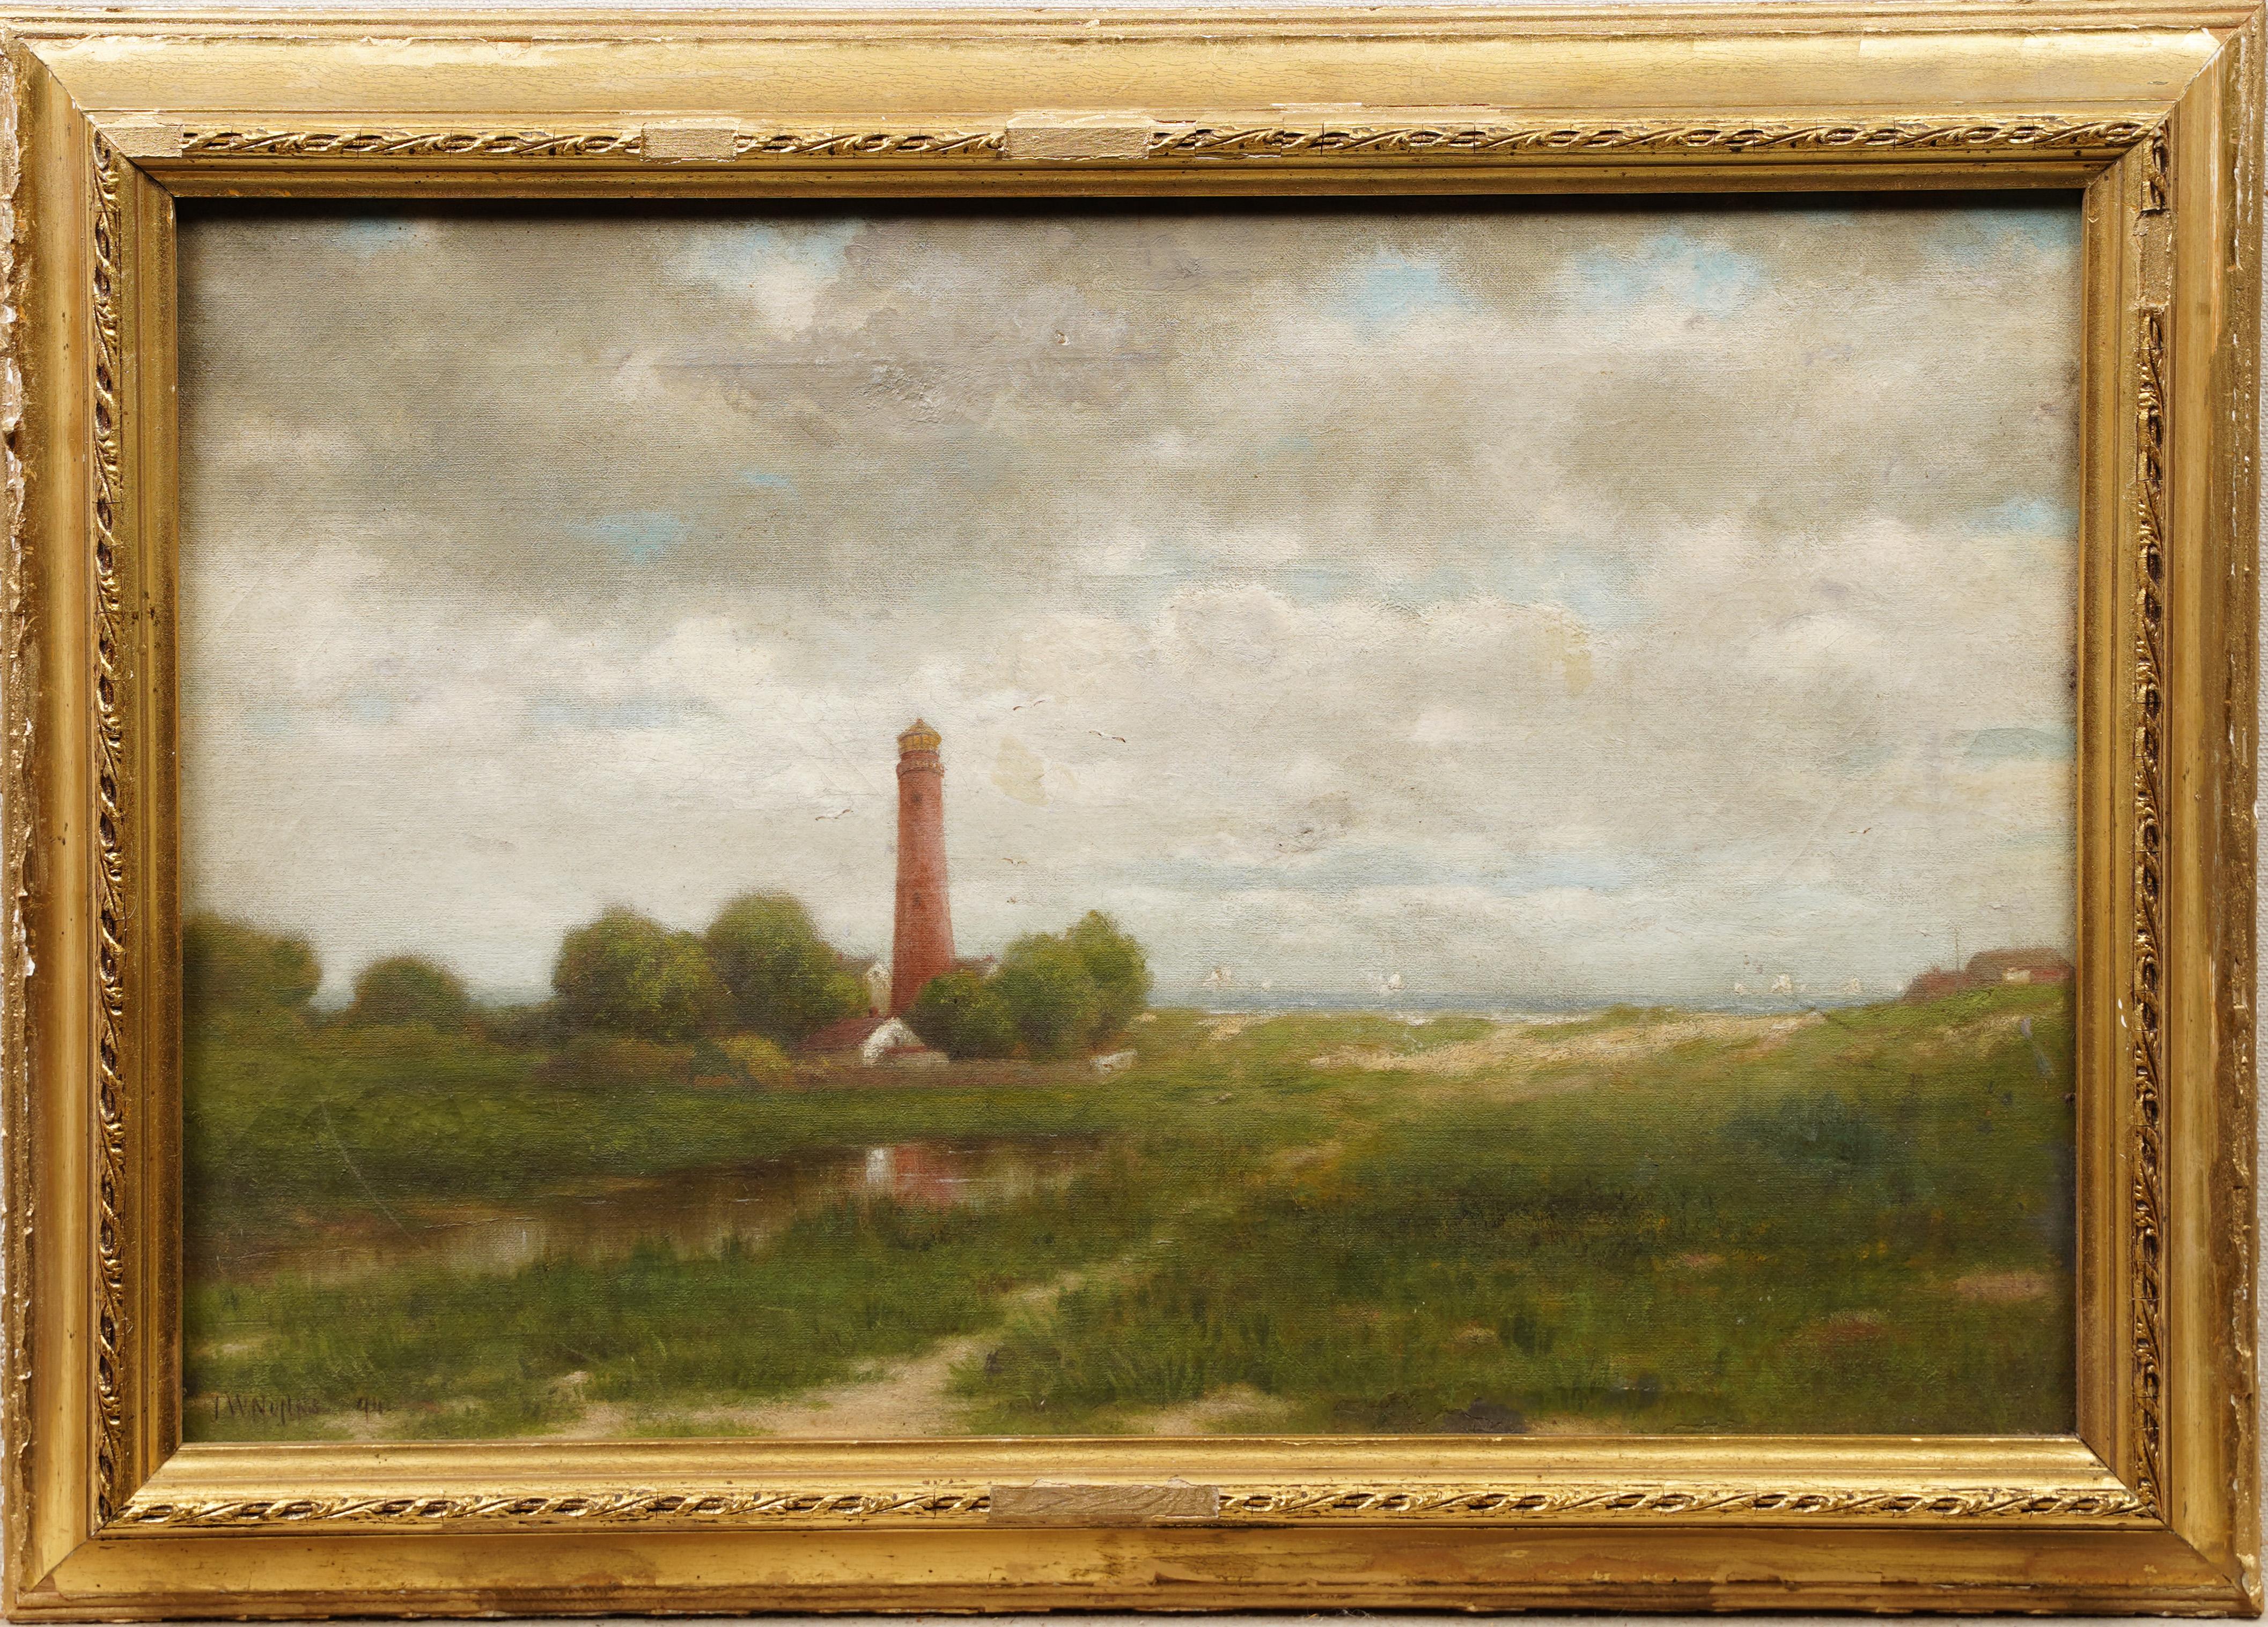 Antique American impressionist southern oil painting.  Oil on canvas.  Framed.  Label from a Florida frame shop verso. 